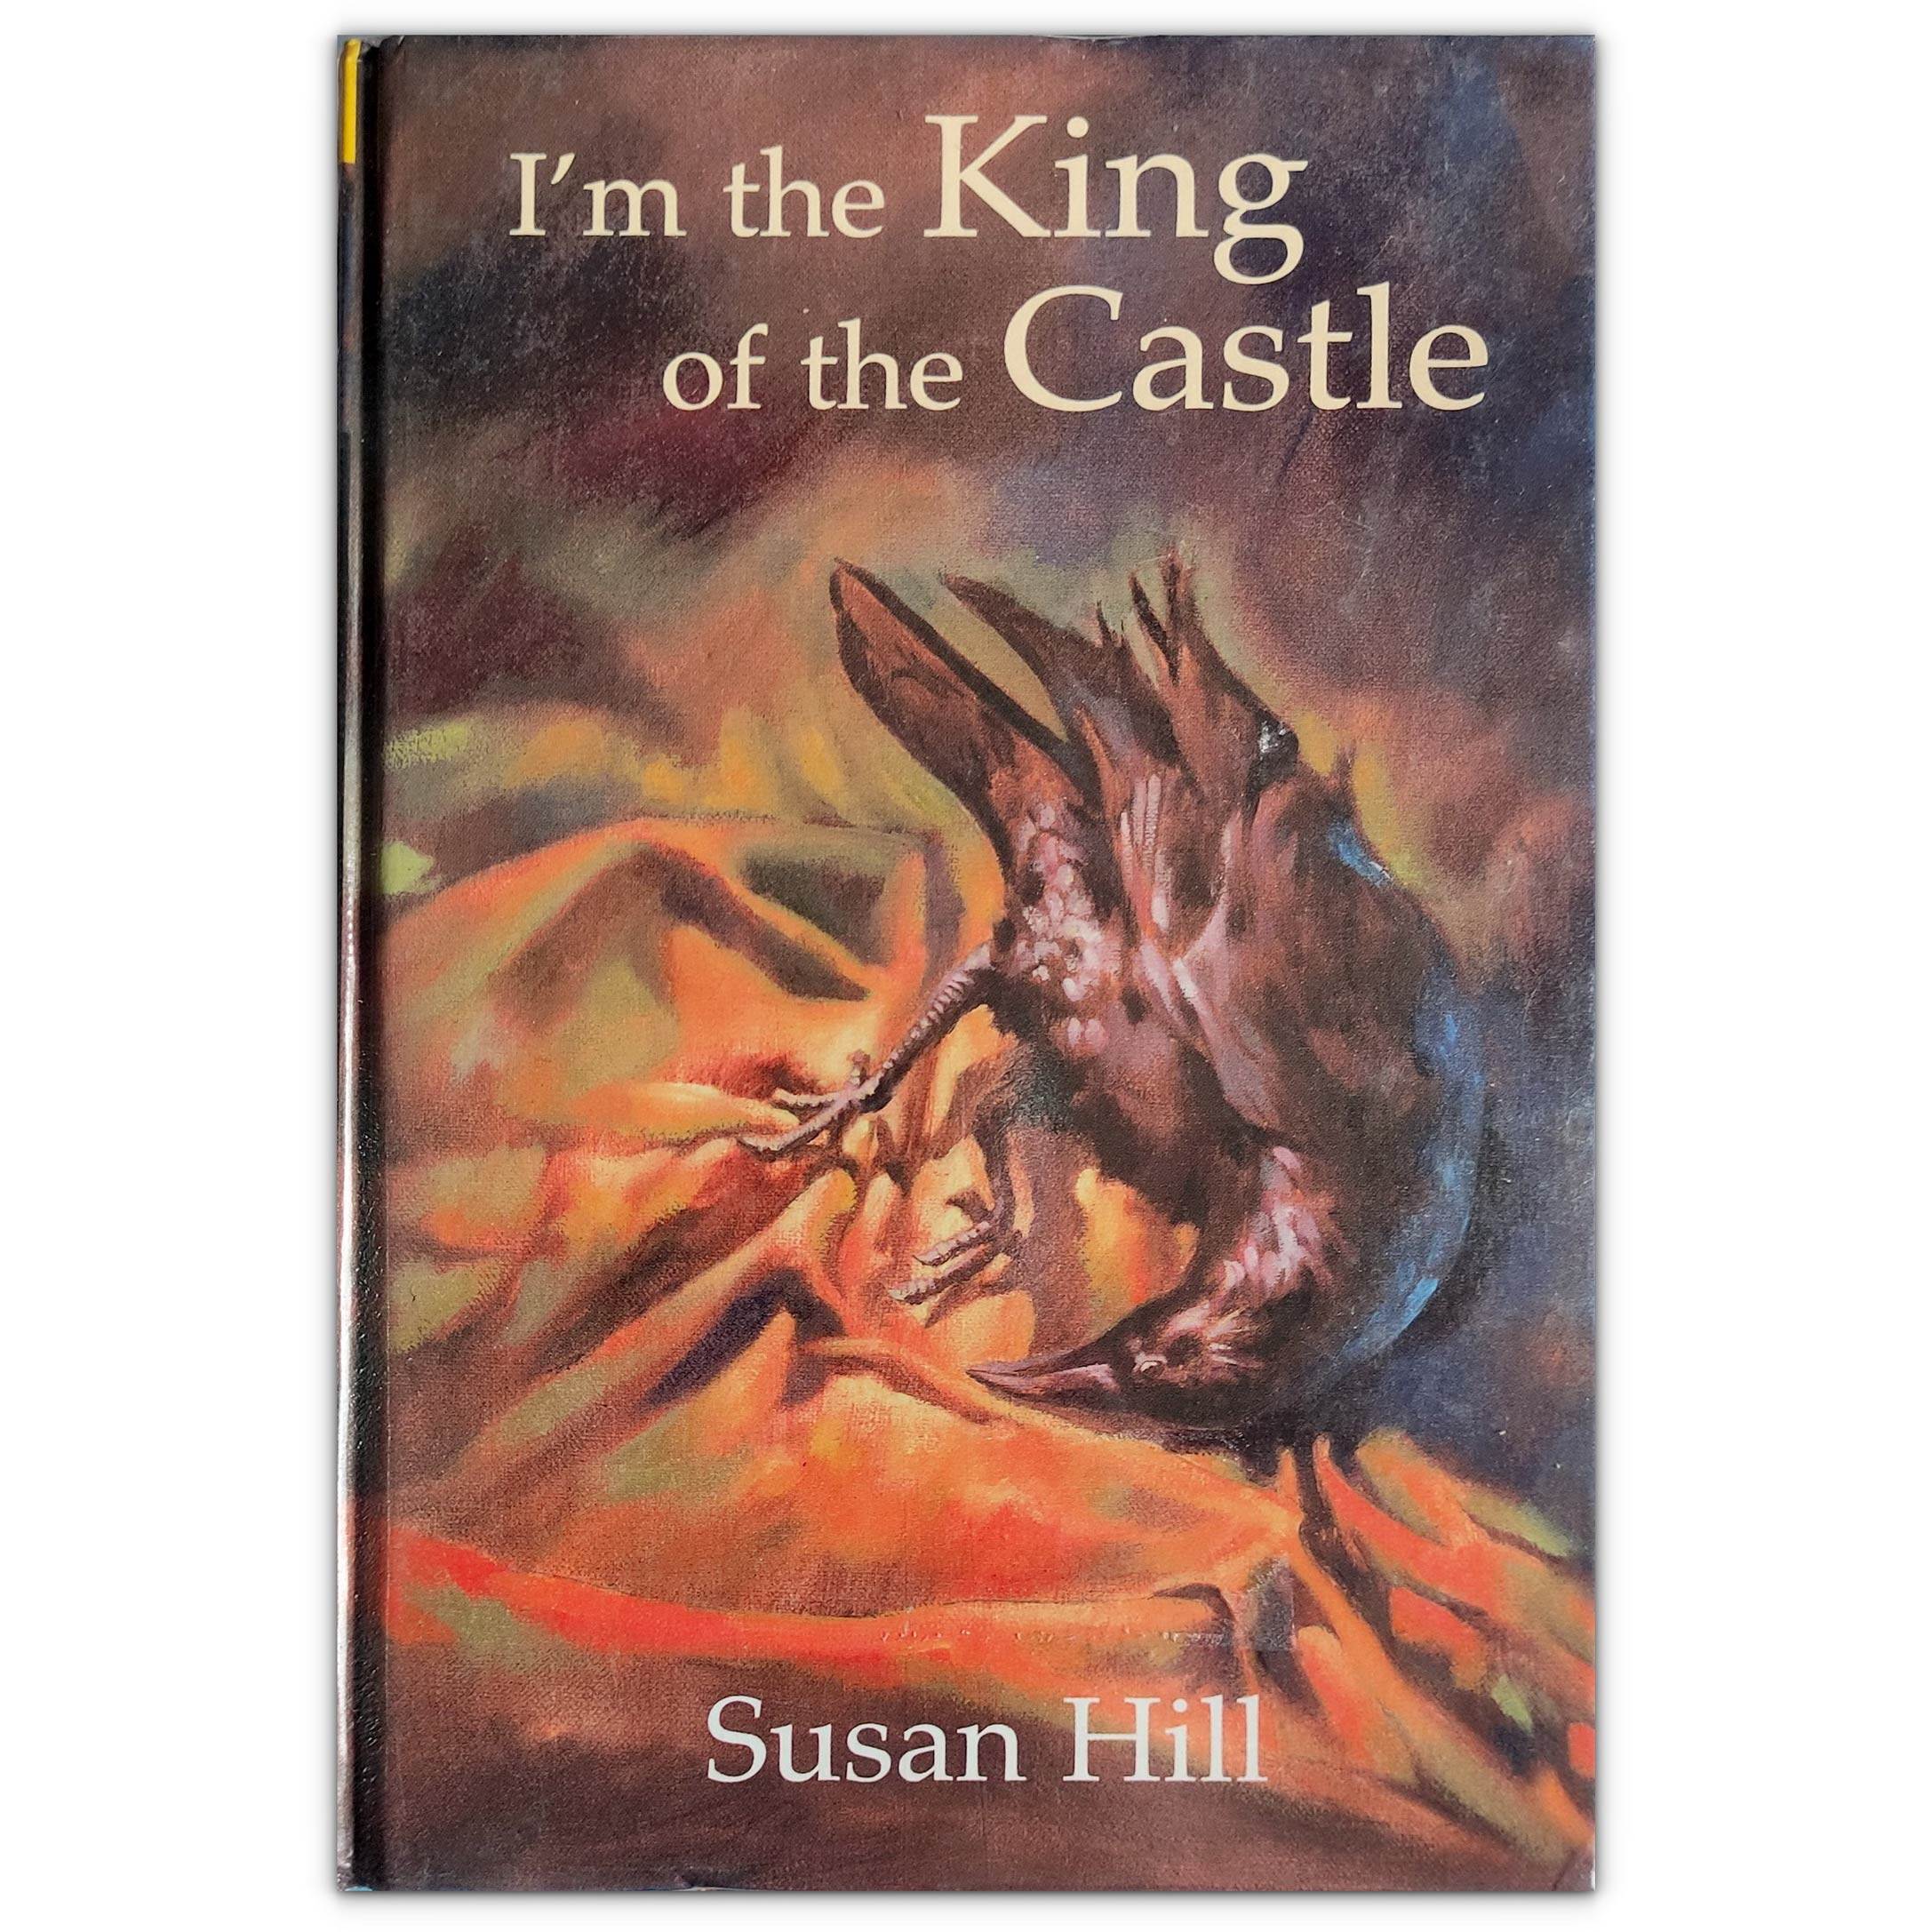 I'm the King of the Castle (1970 novel) by Susan Hill (ภาษาอังกฤษ